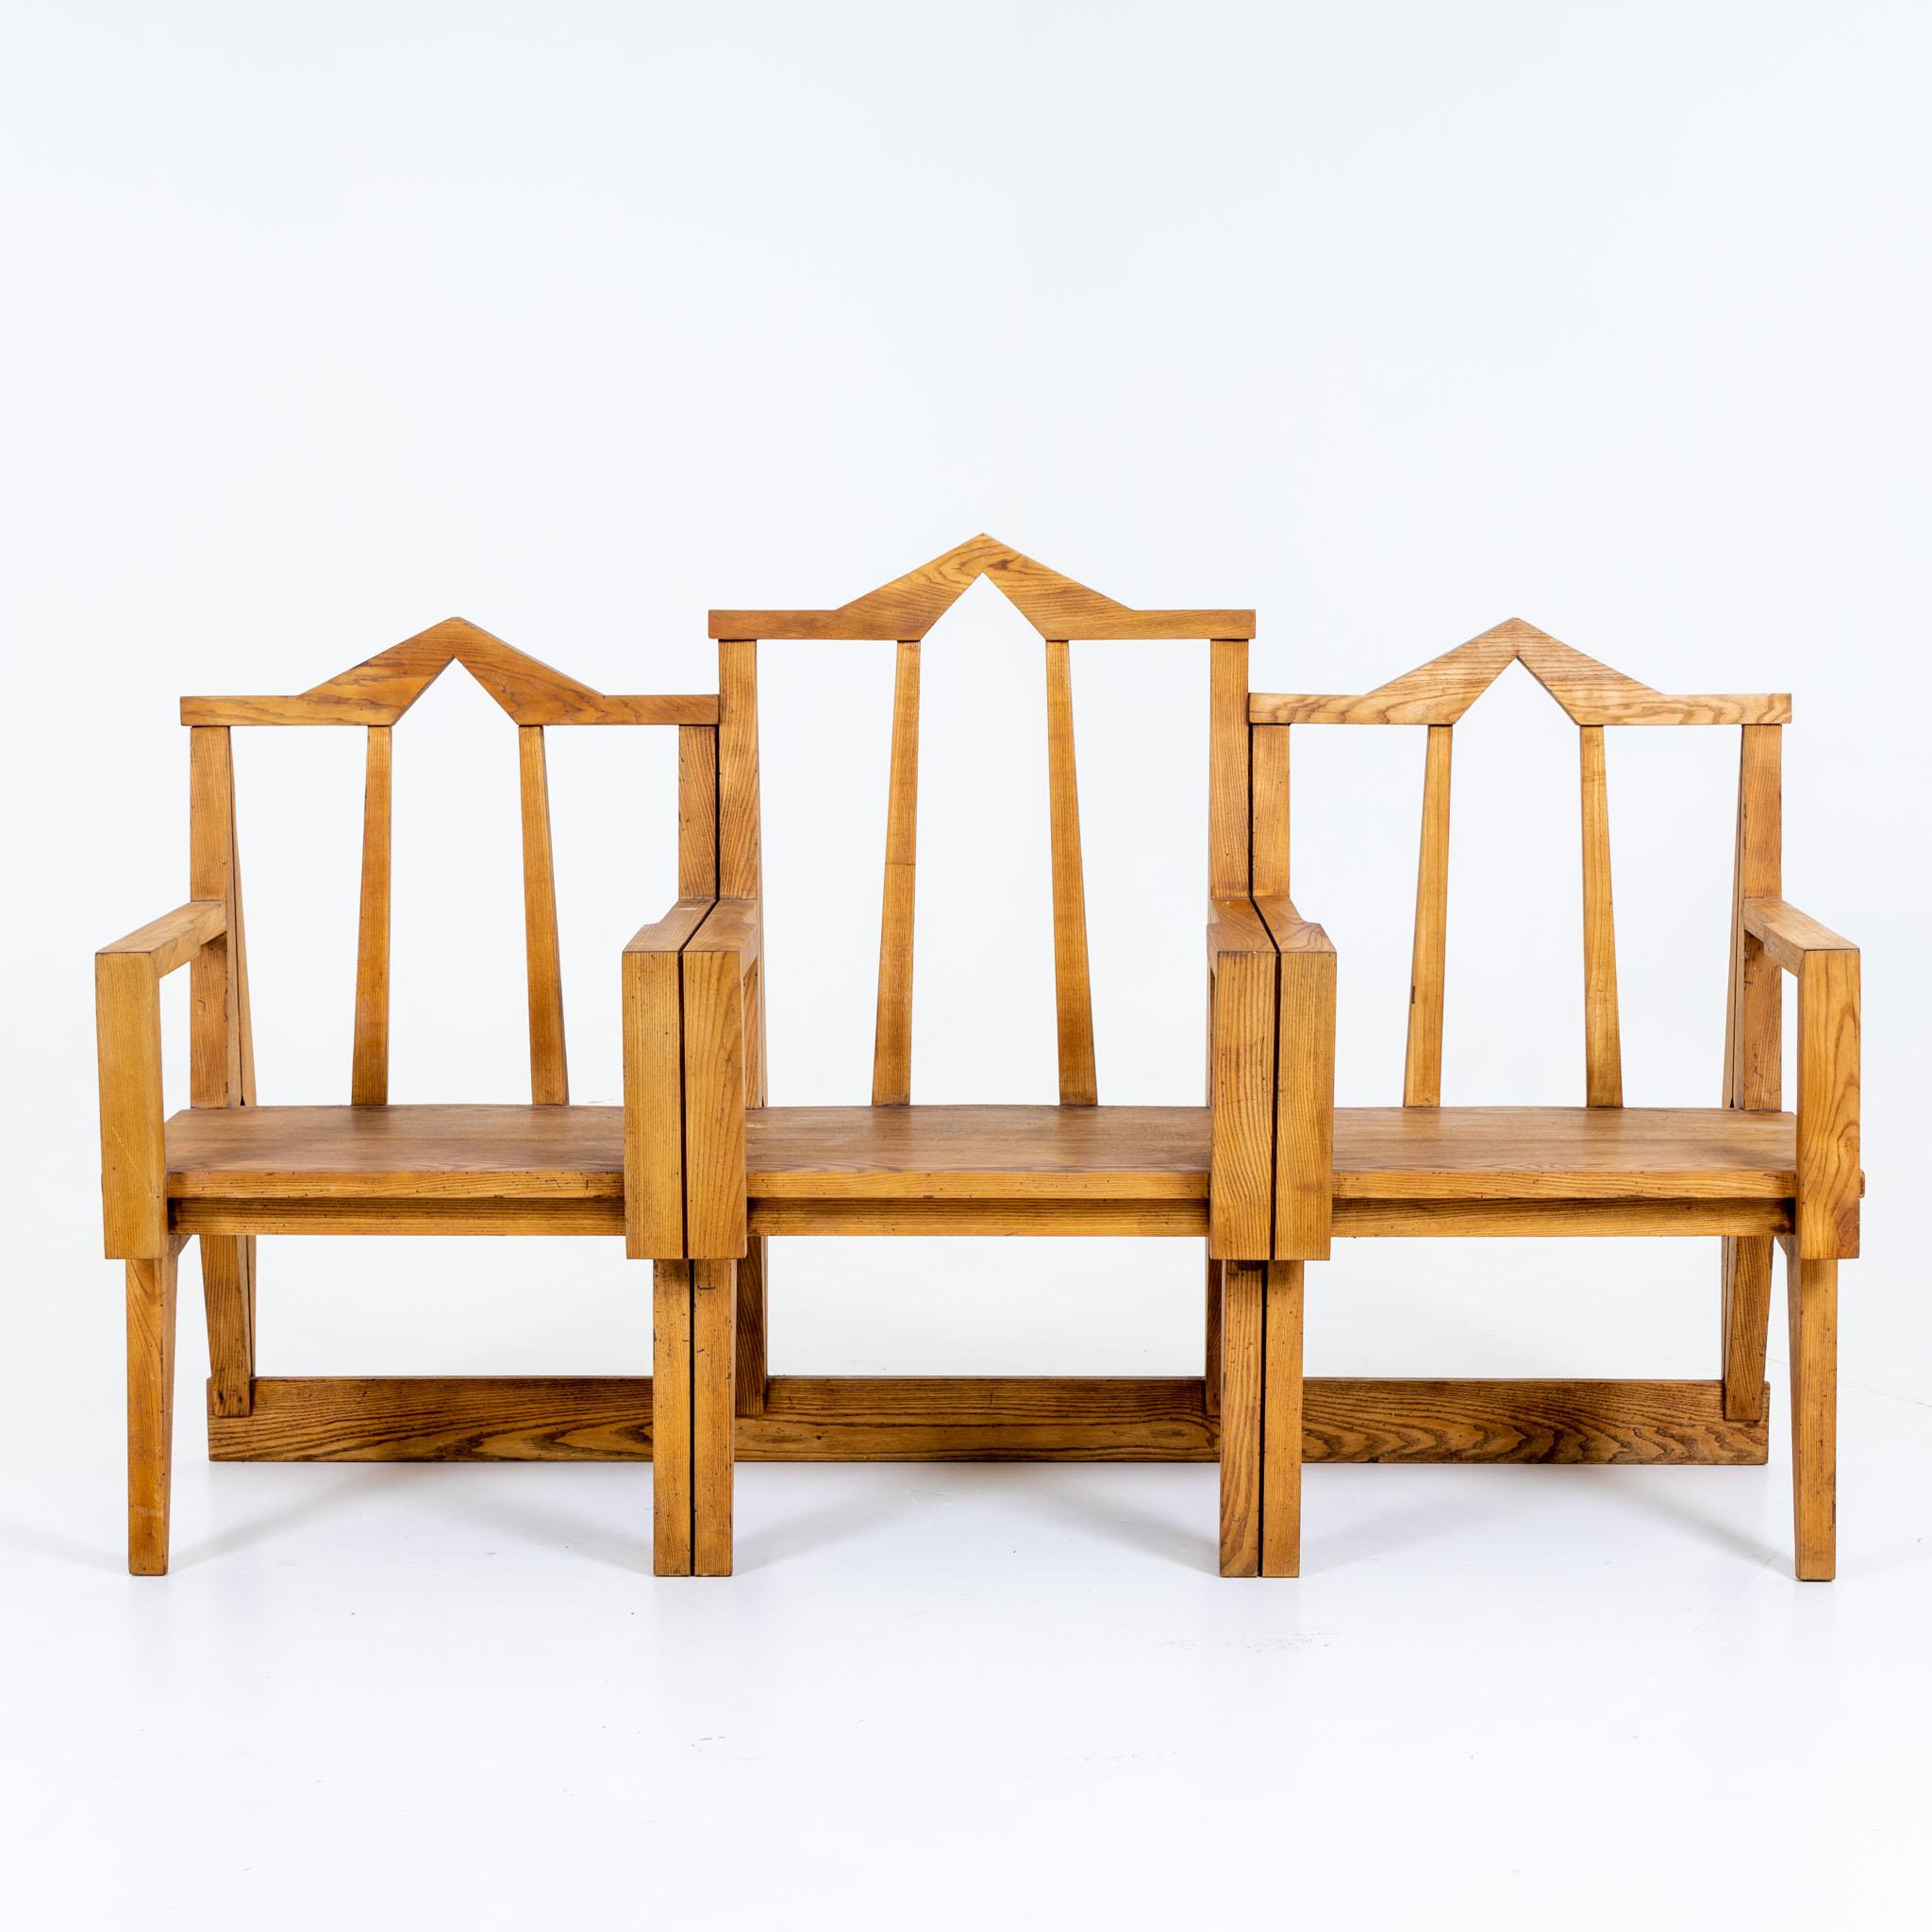 Italian bench in natural wood with three seats and armrests as well as gabled backs.